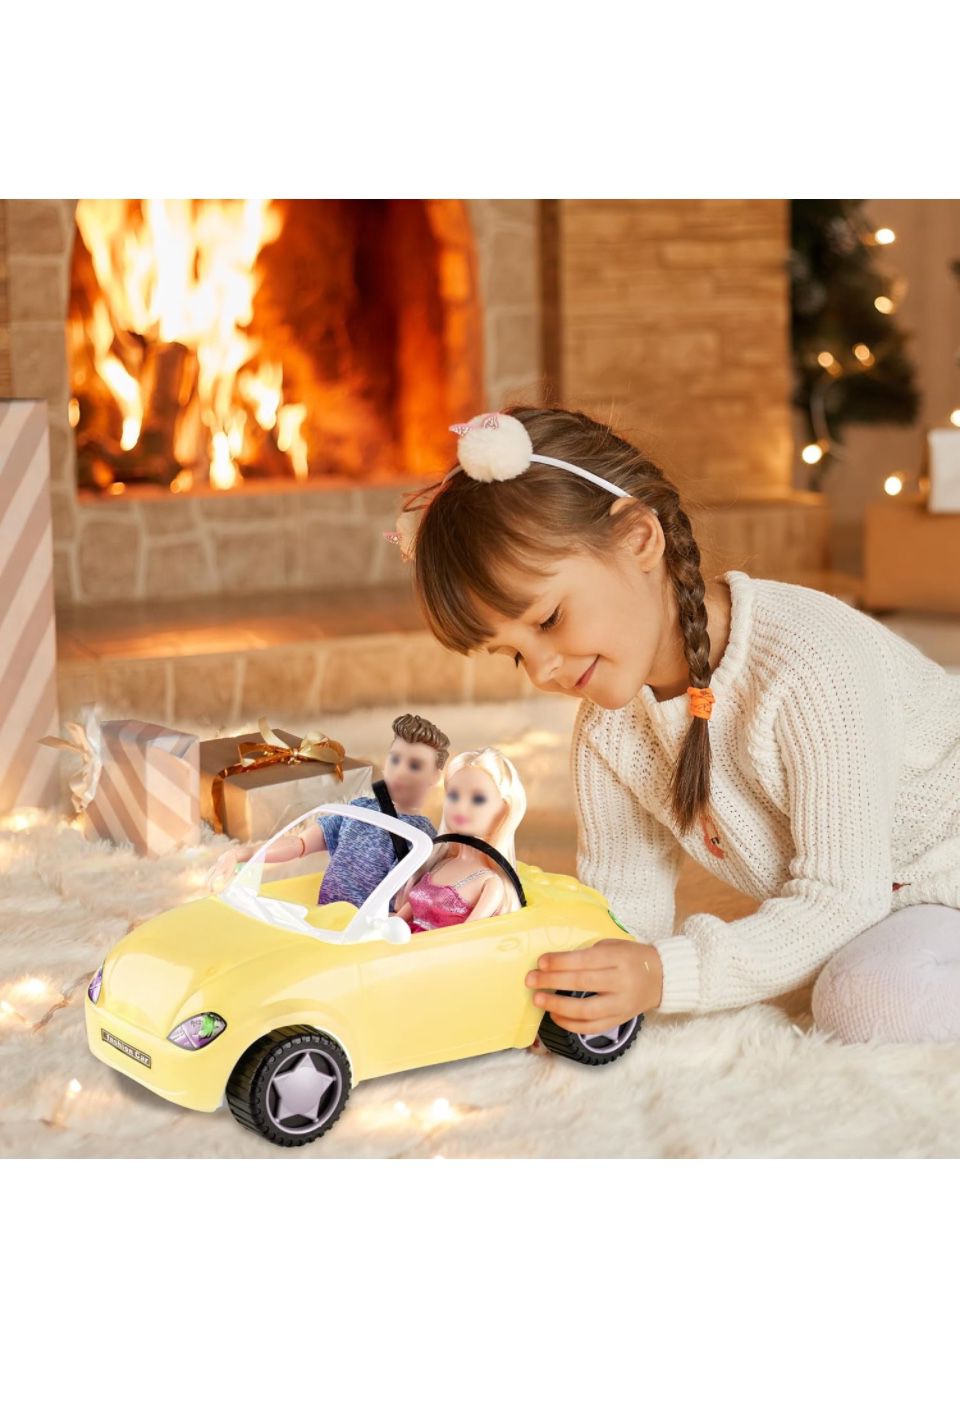 Toy Vehicle For Kids New